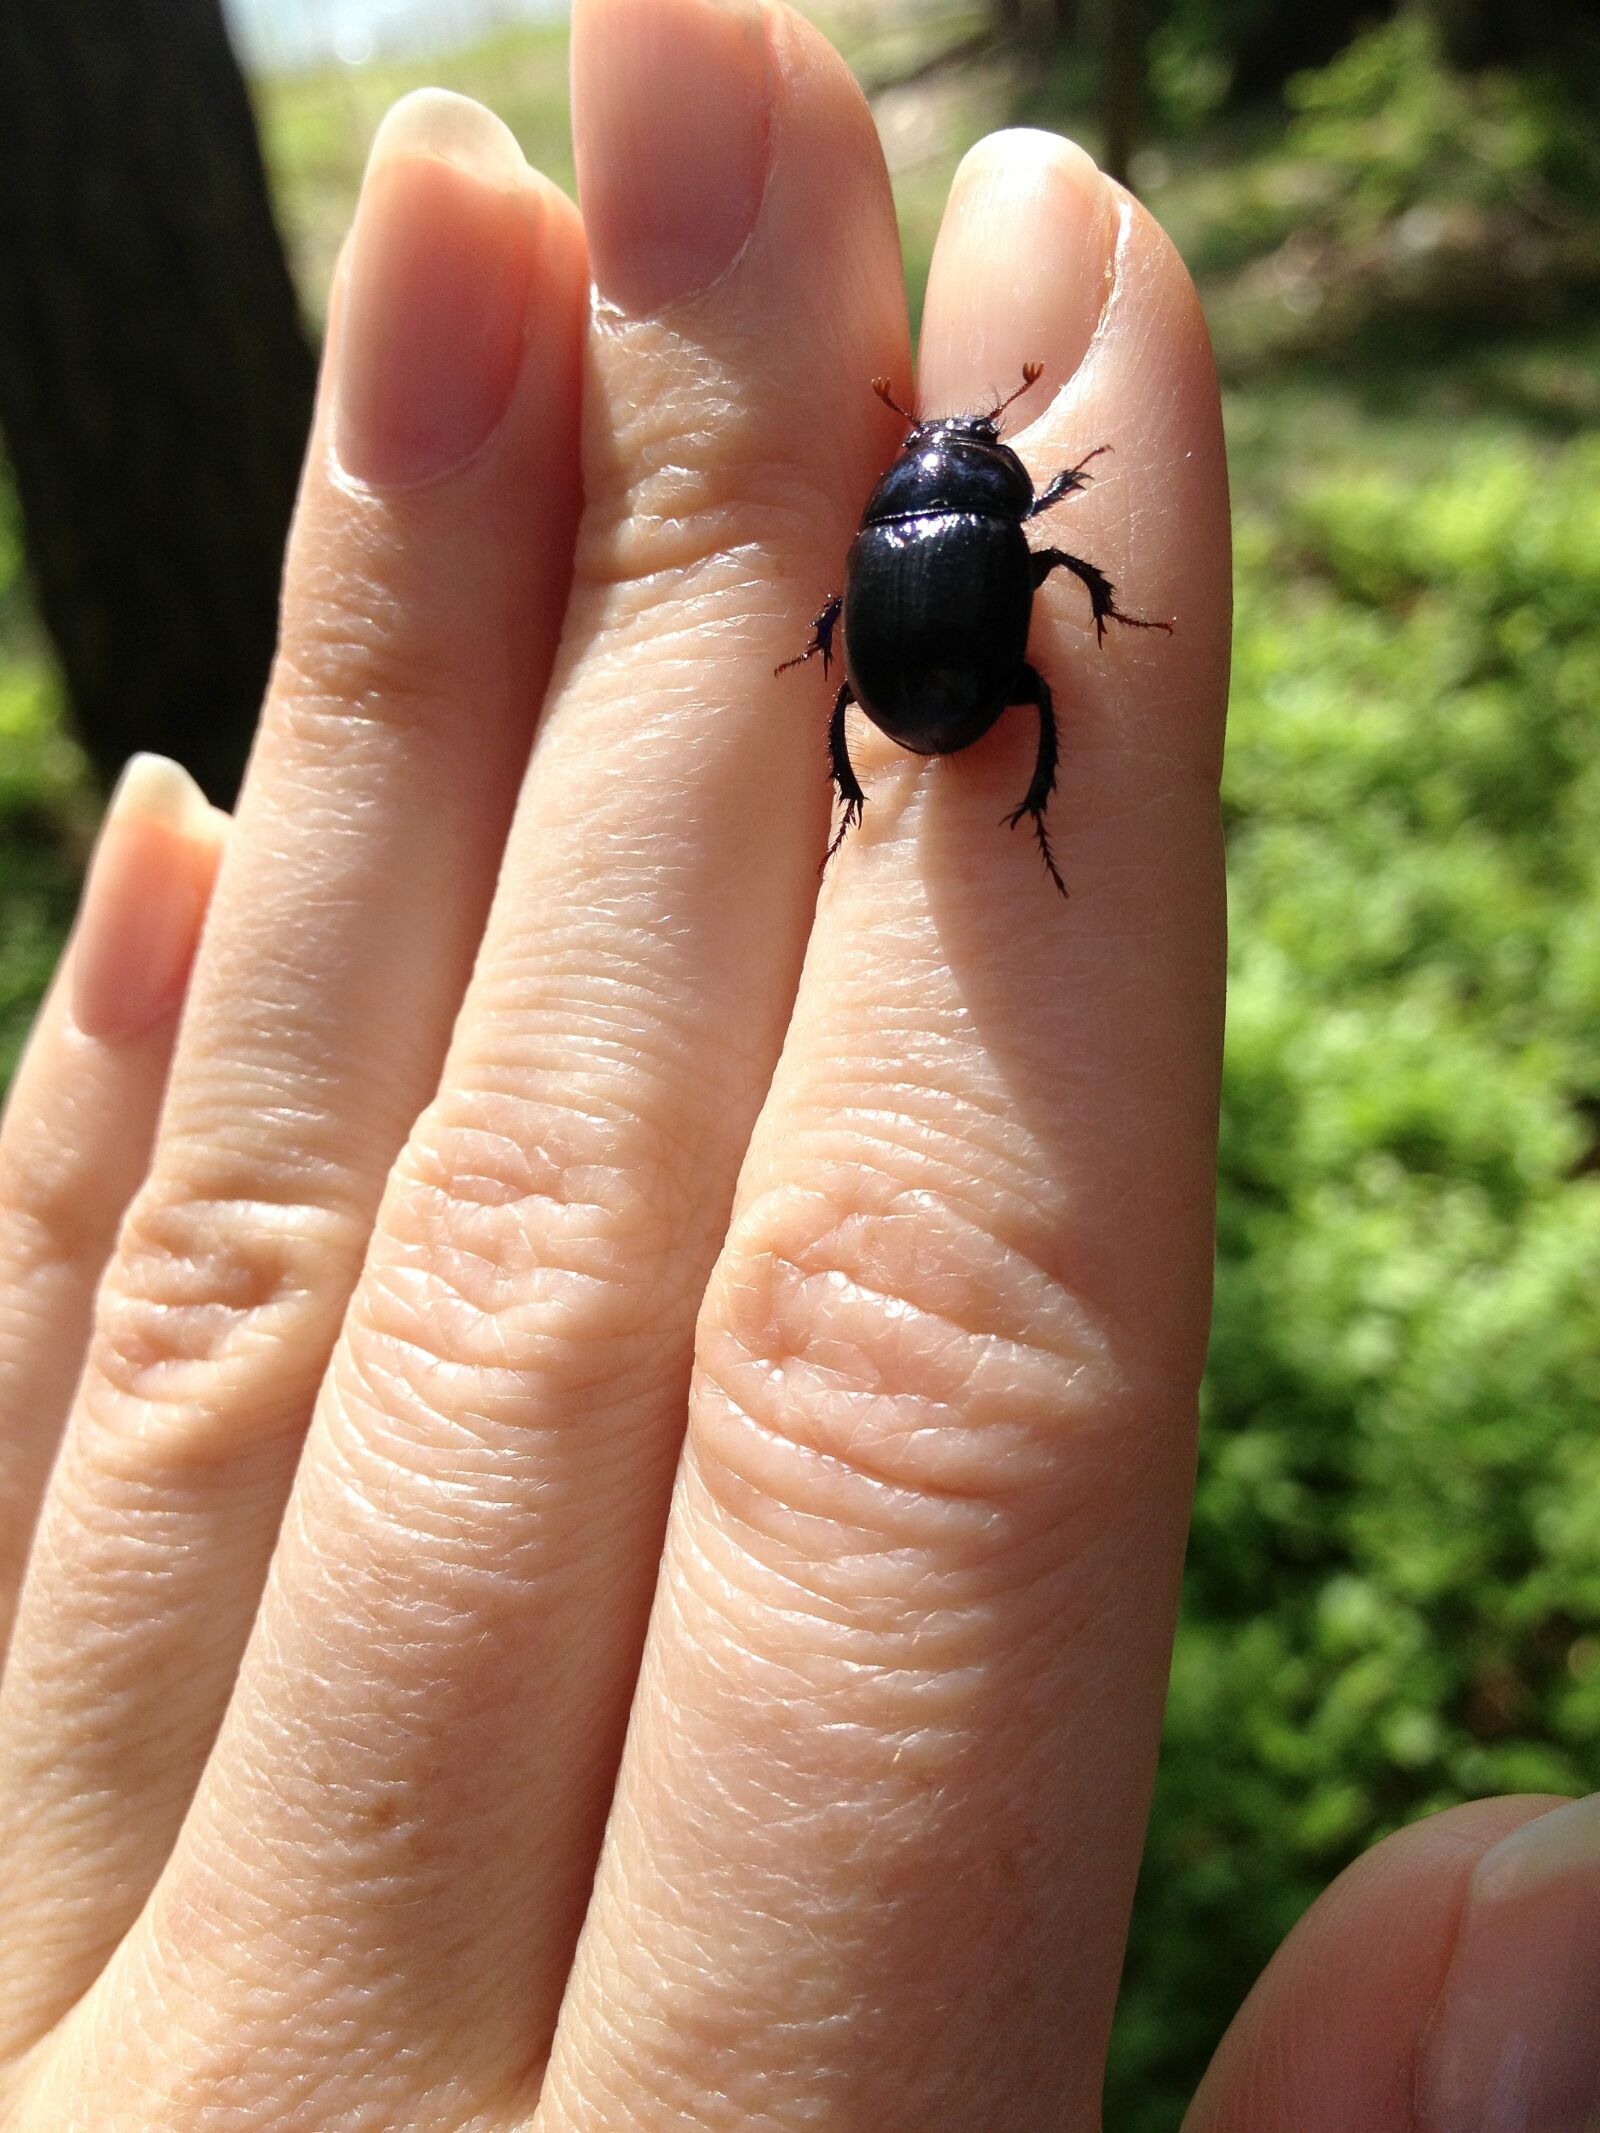 Apple iPhone 4S sample photo. Beetle, hand, fingers photography